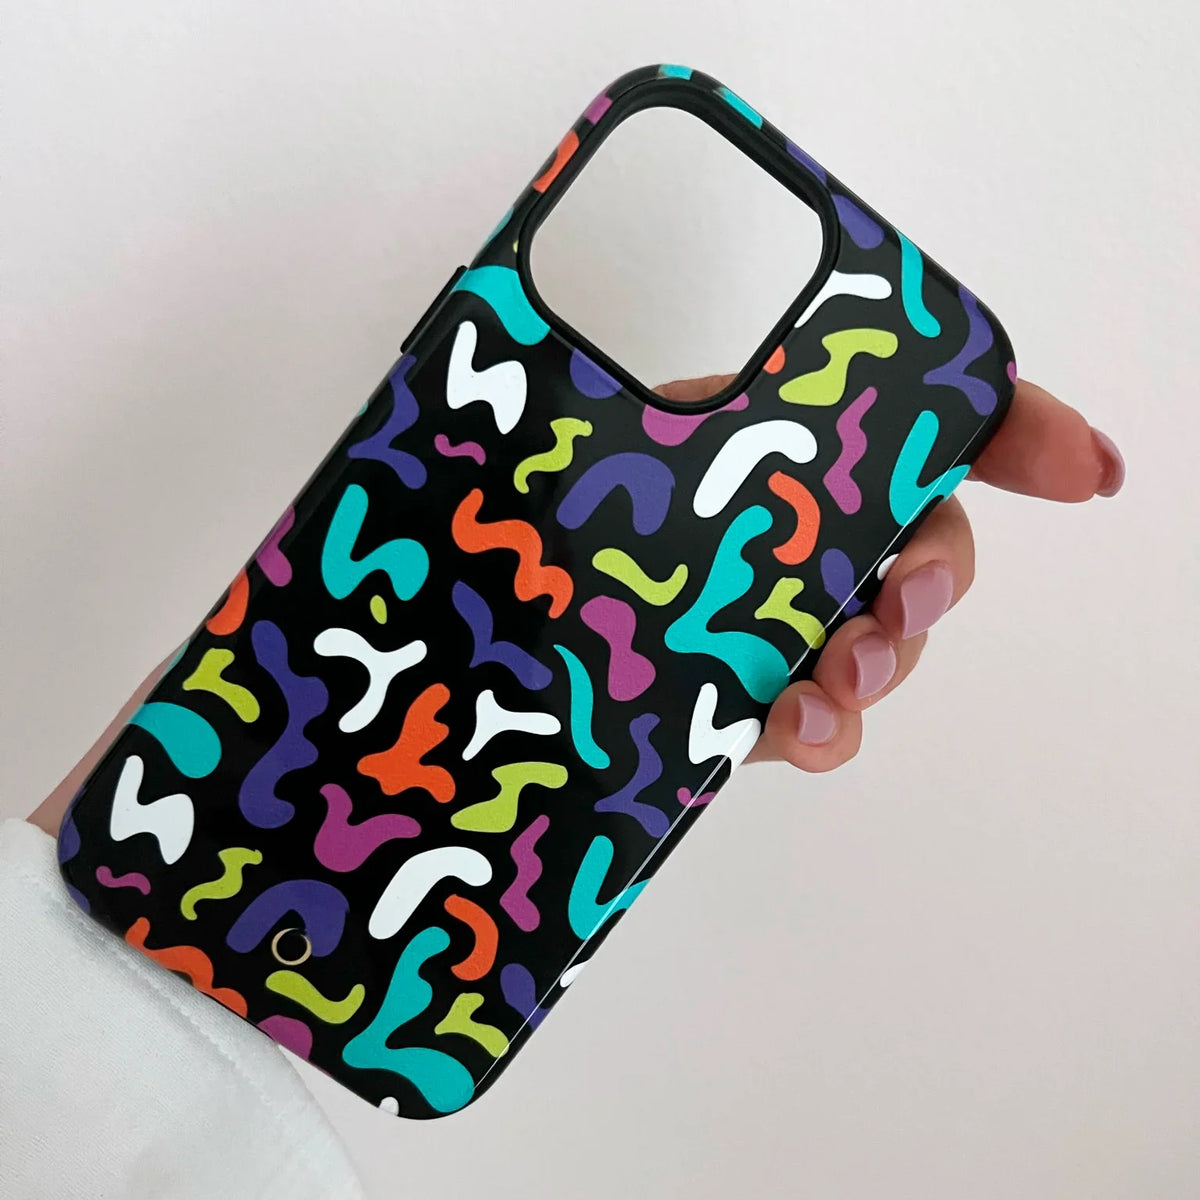 Chromatic Bliss iPhone Case - iPhone 12